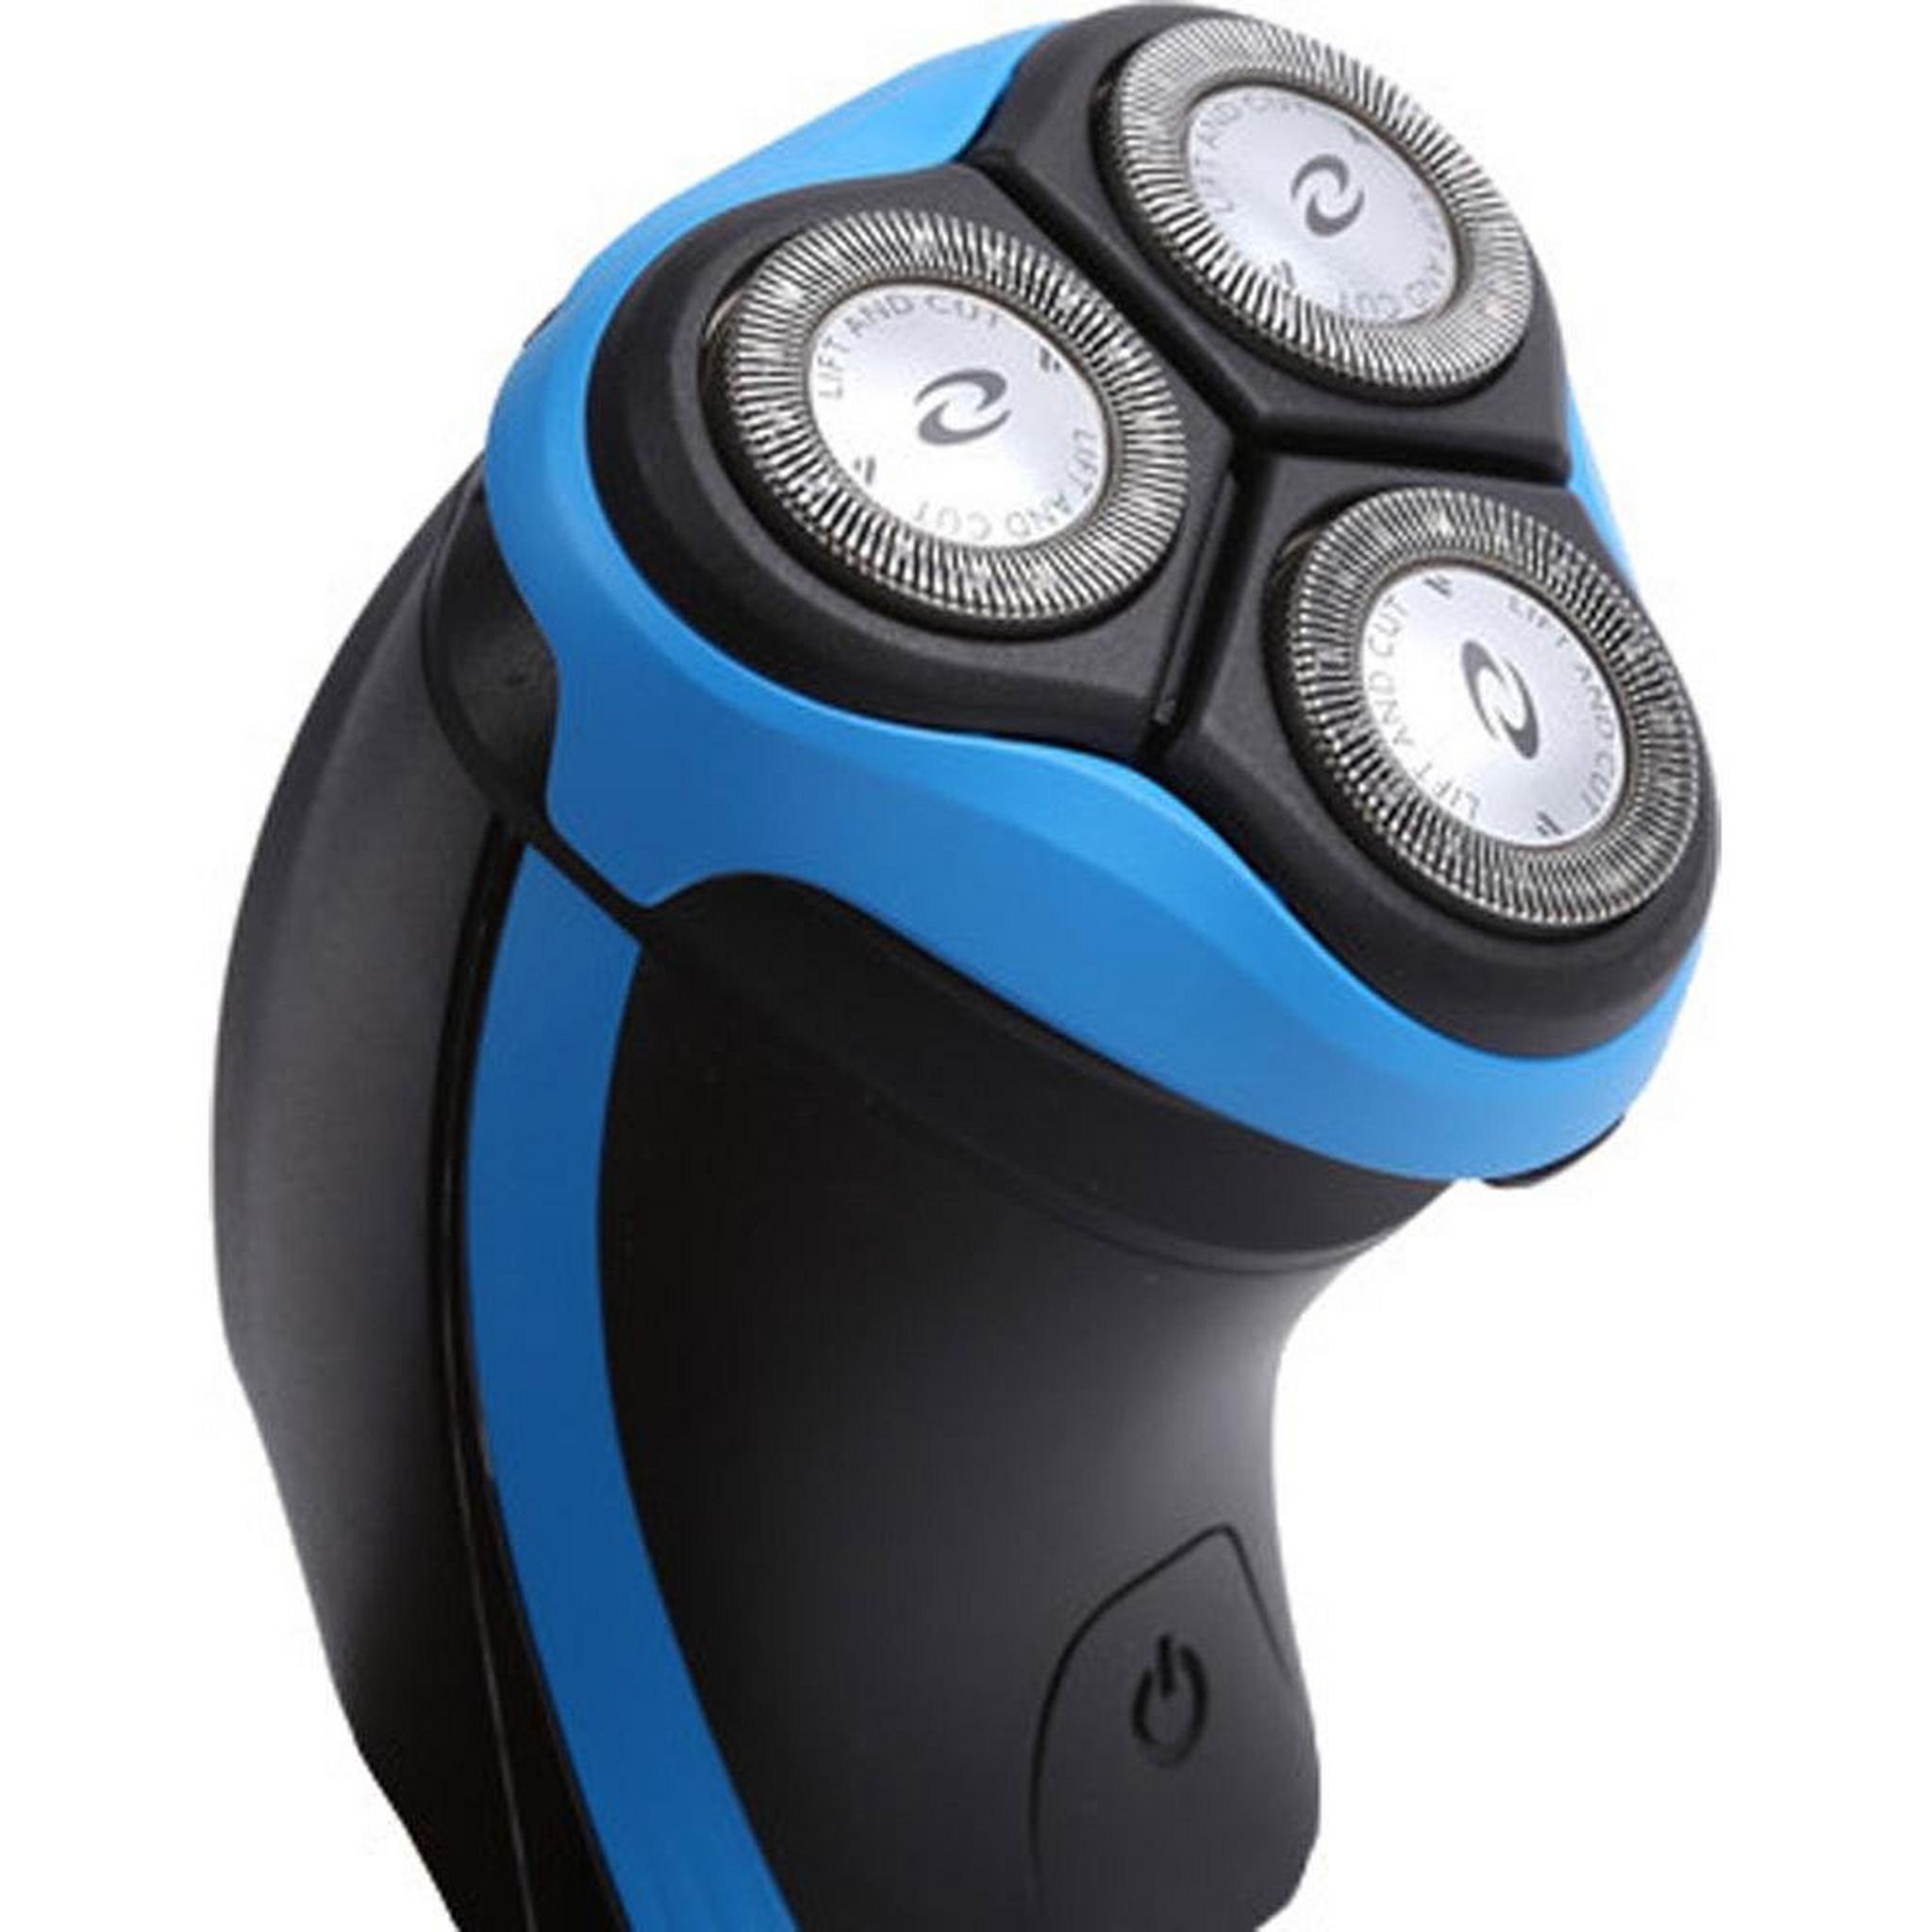 Philips AquaTouch Wet & Dry Shaver with Pop Up Trimmer AT890